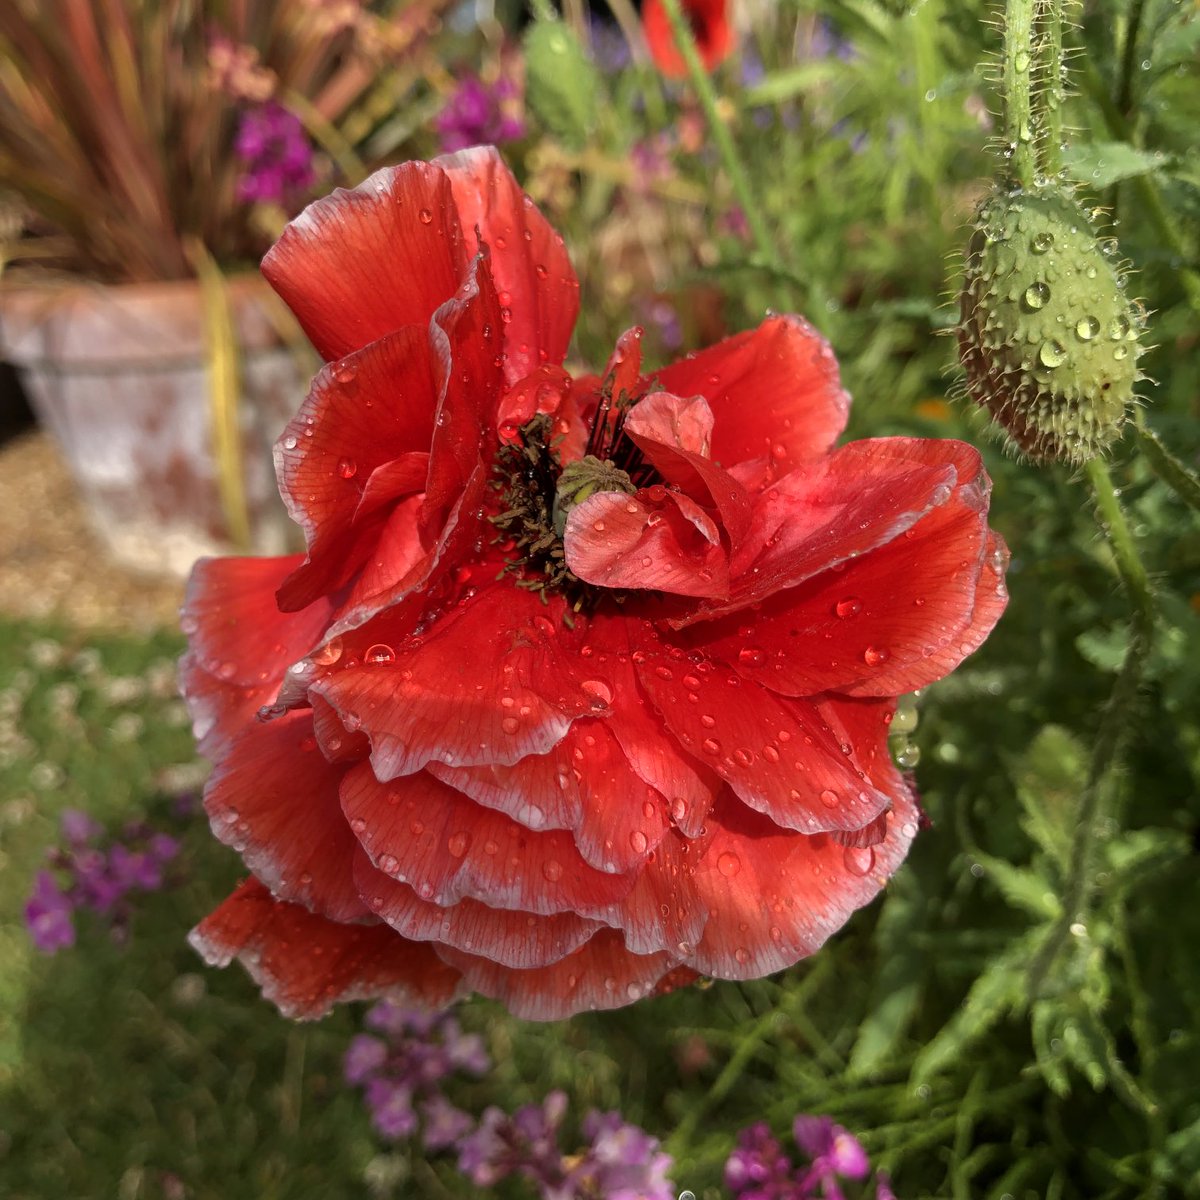 Poppy ‘Red Pom Poms’ in my annual display in the Trials Garden at Wisley ⁦@The_RHS⁩ ⁦@RHSWisley⁩ #gardens #flowers #plants